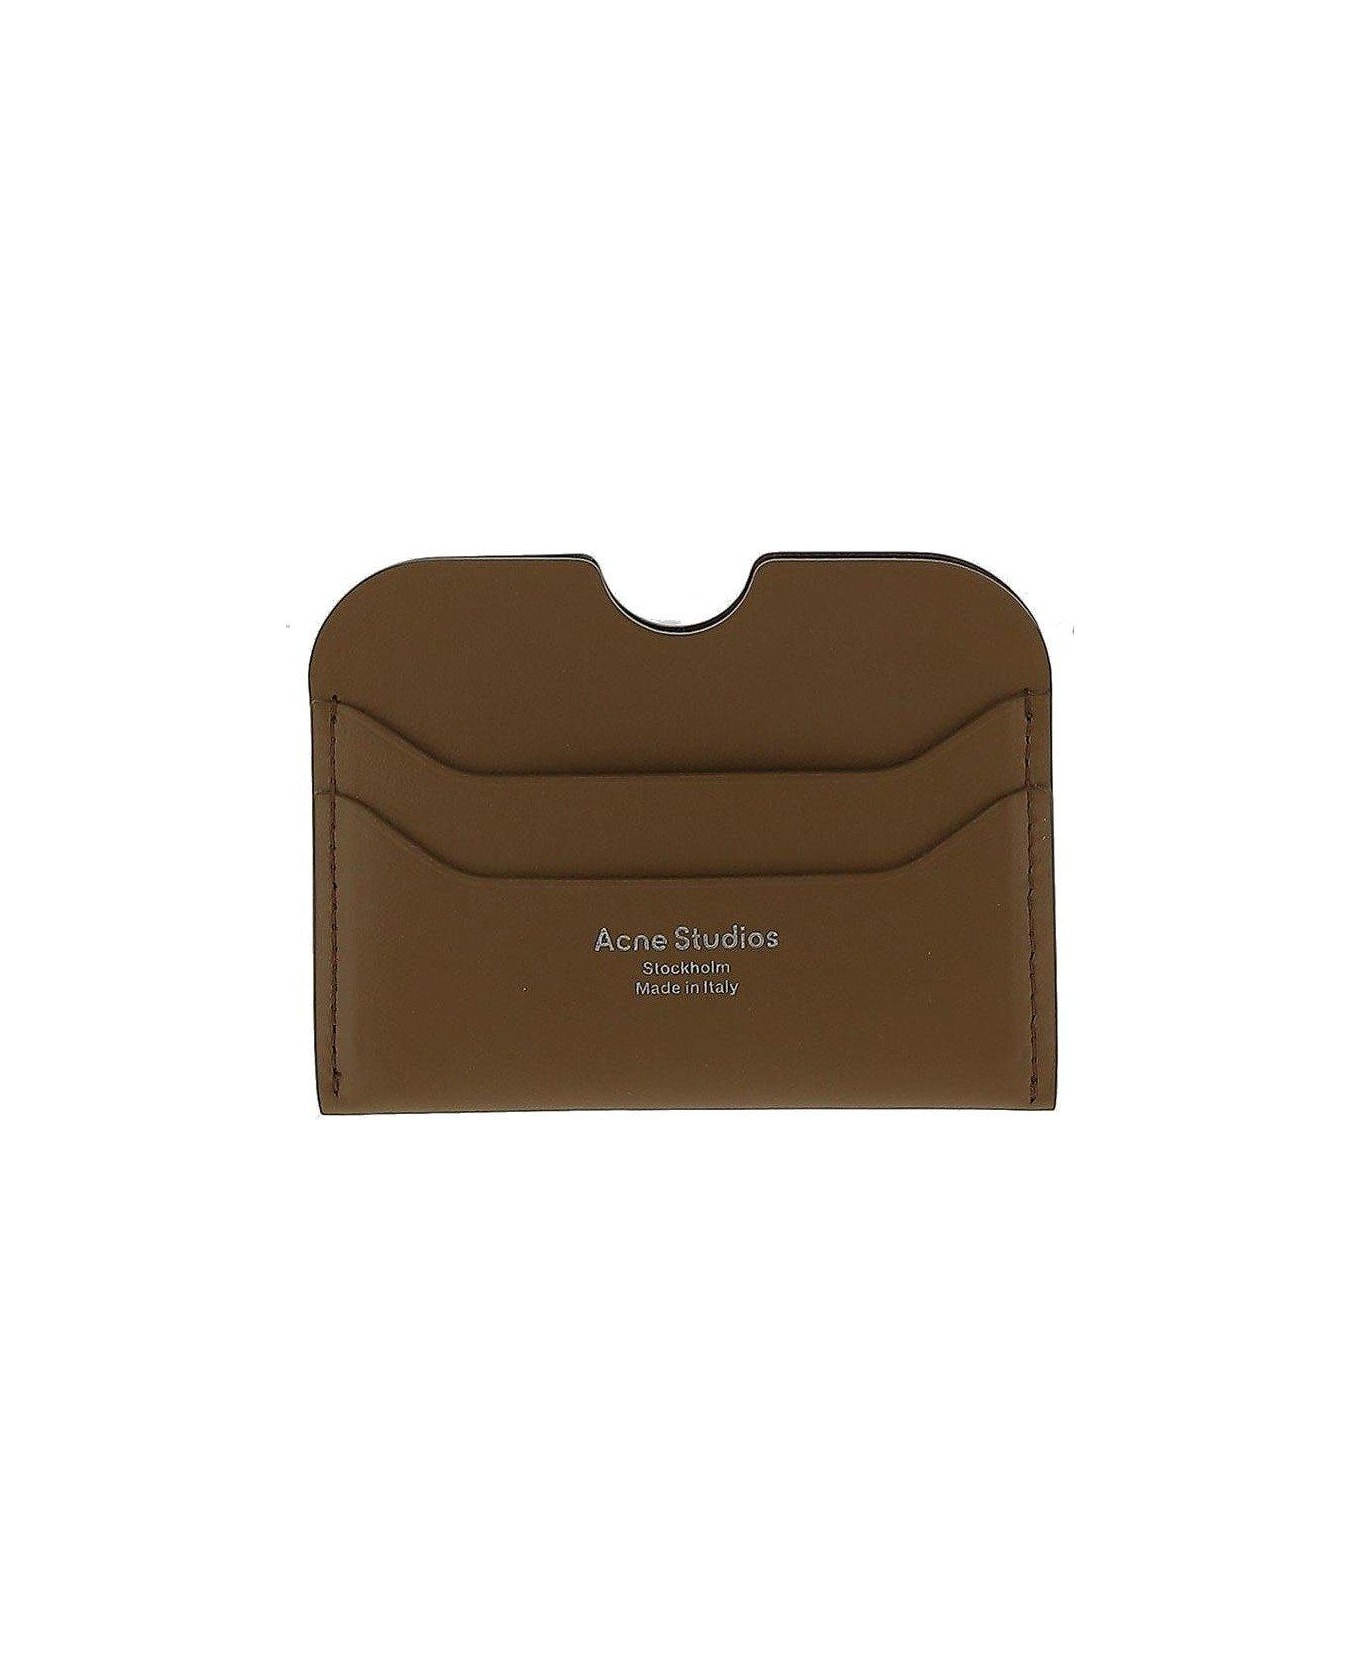 Acne Studios Logo Printed Cut-out Detailed Cardholder - CAMEL BROWN